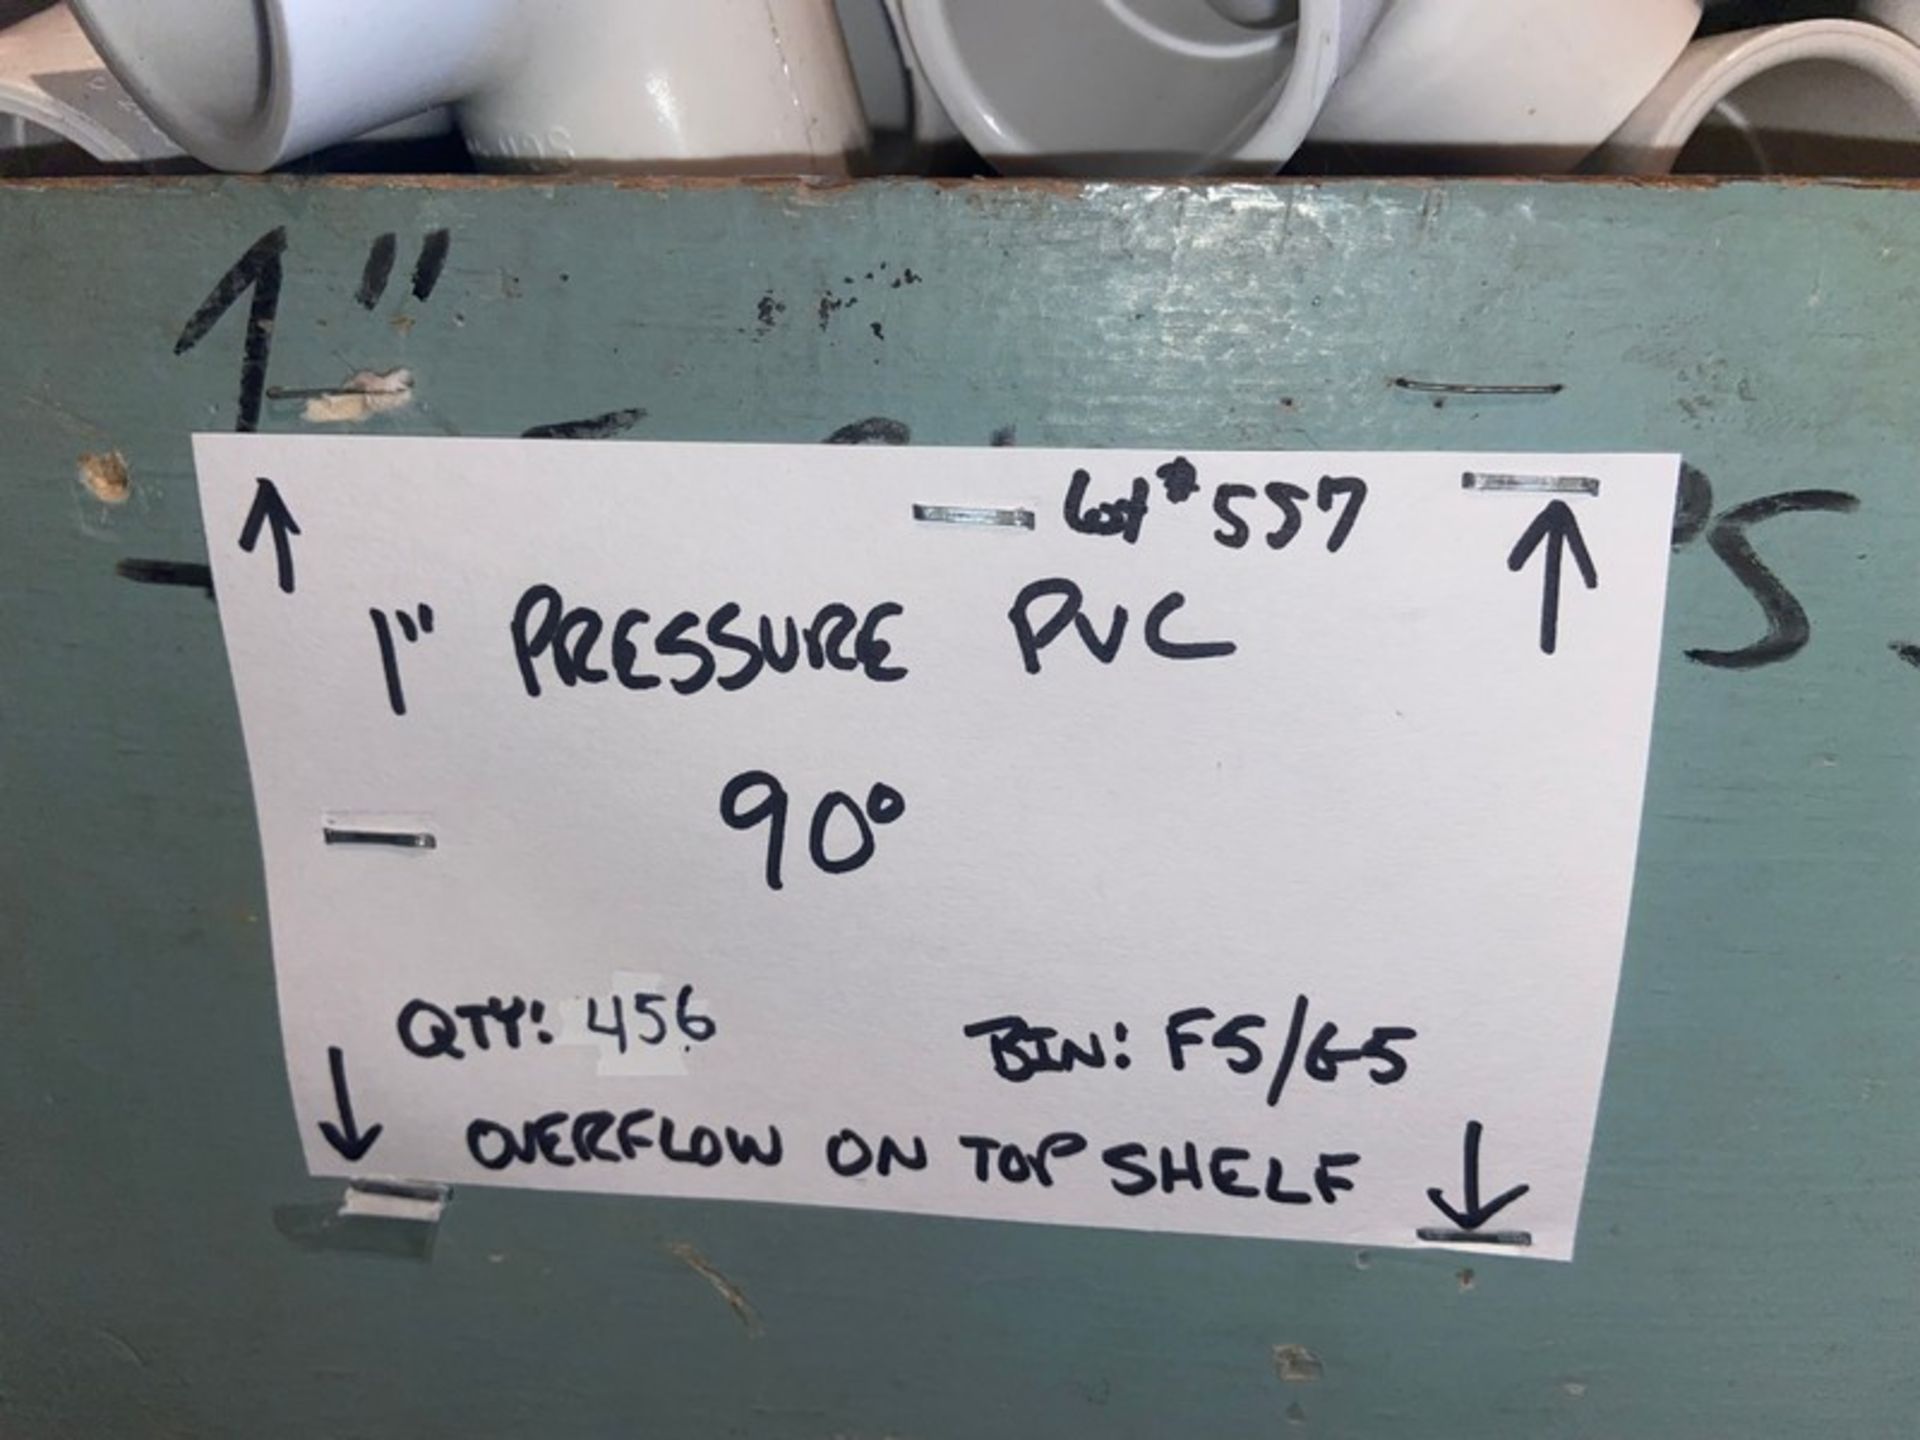 (456) 1” Pressure PVC 90’ (Bin:F5/G5) (LOCATED IN MONROEVILLE, PA) - Image 5 of 10